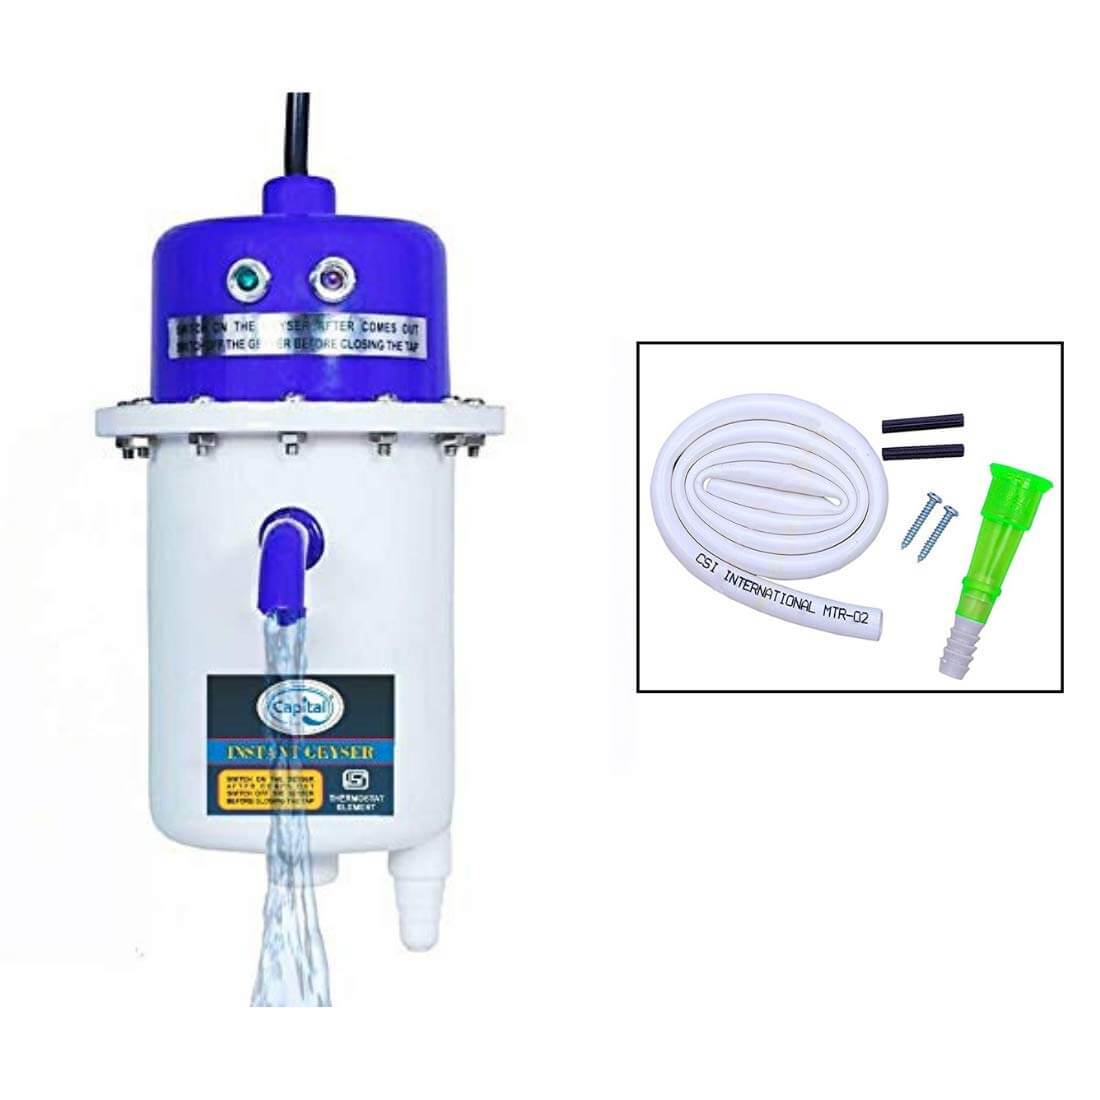 ElectroGuard Tap Auto Cut Off Portable Instant Water Heater/Geyser for  Kitchen, Bathroom, Office, Restaurants, Labs, Clinics, Saloon, Beauty  Parlor 